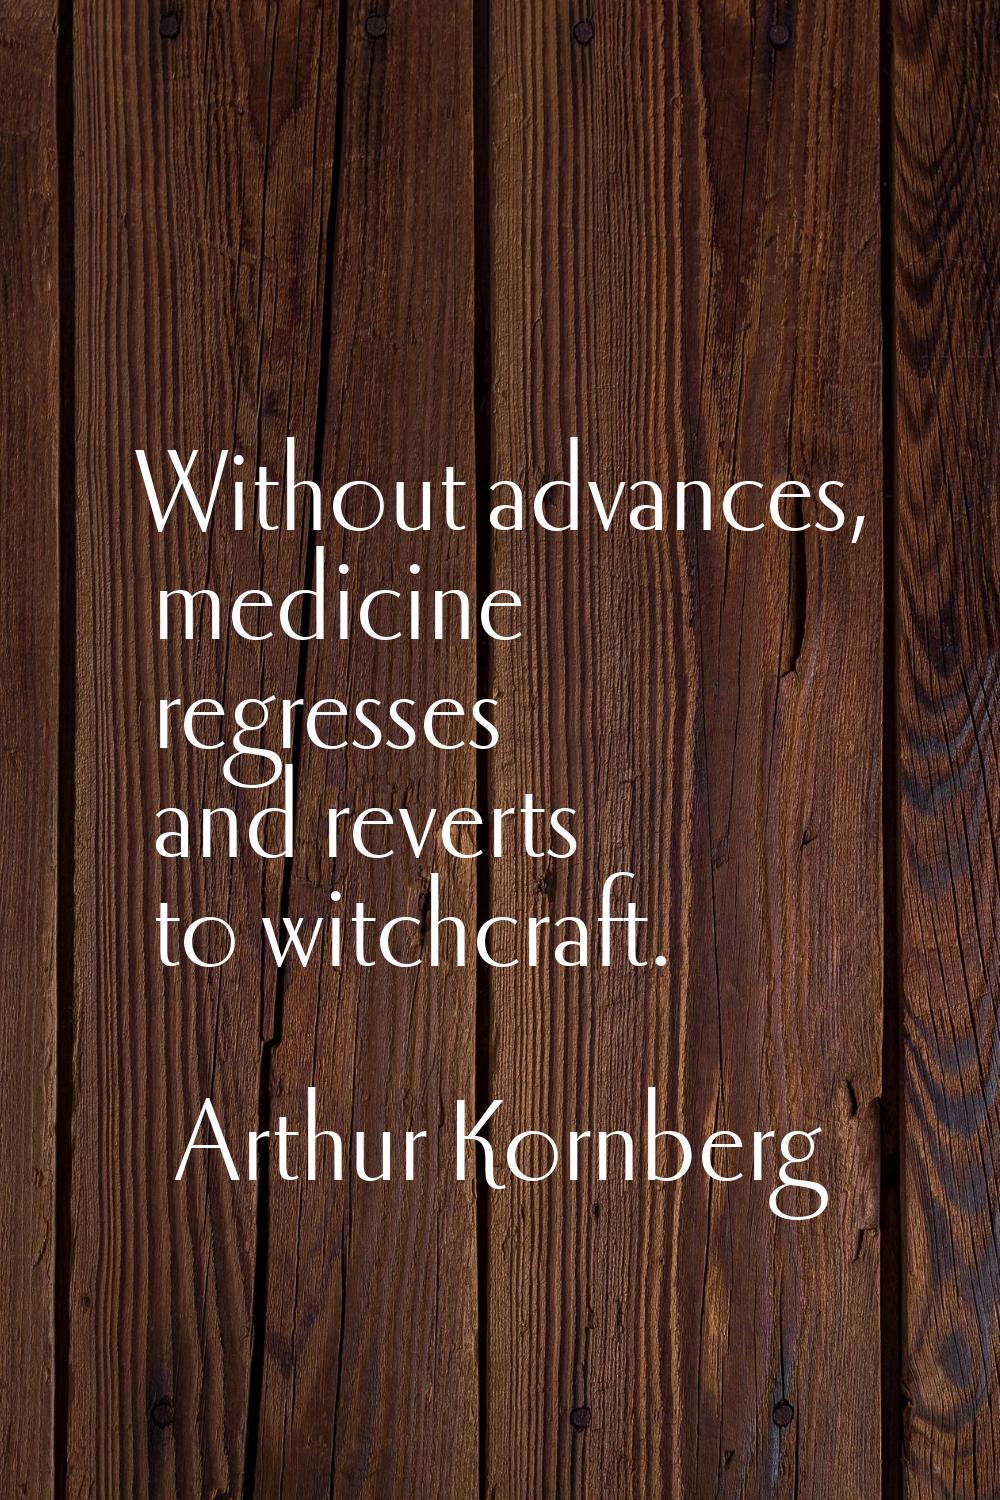 Without advances, medicine regresses and reverts to witchcraft.